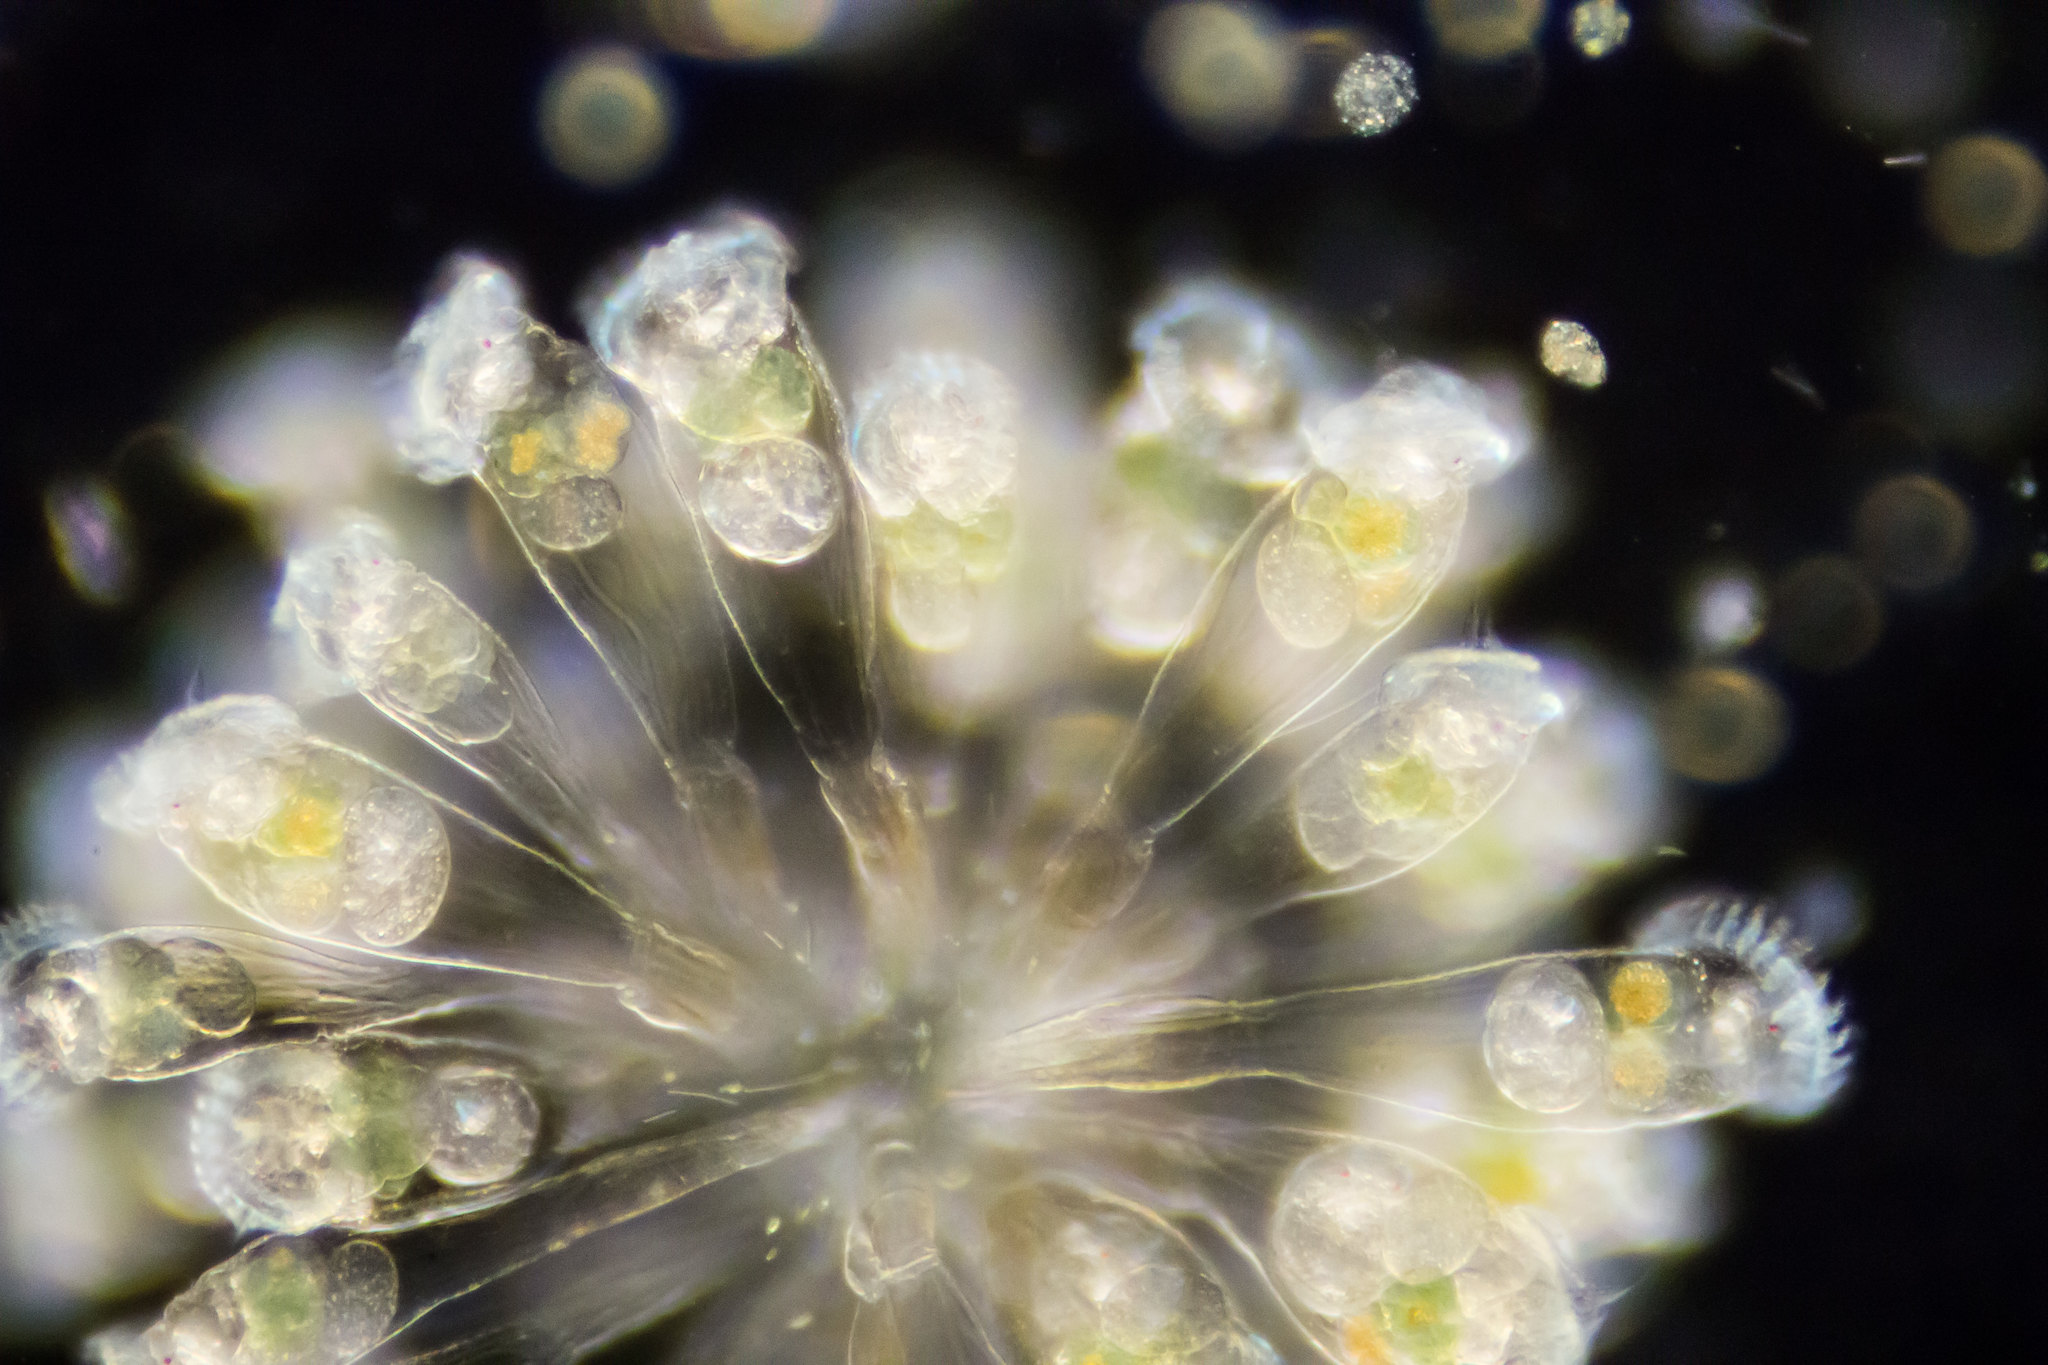 A colony of rotifers at 100x magnification (by Specious Reasons CC BY-NC 2.0 DEED via Flickr).